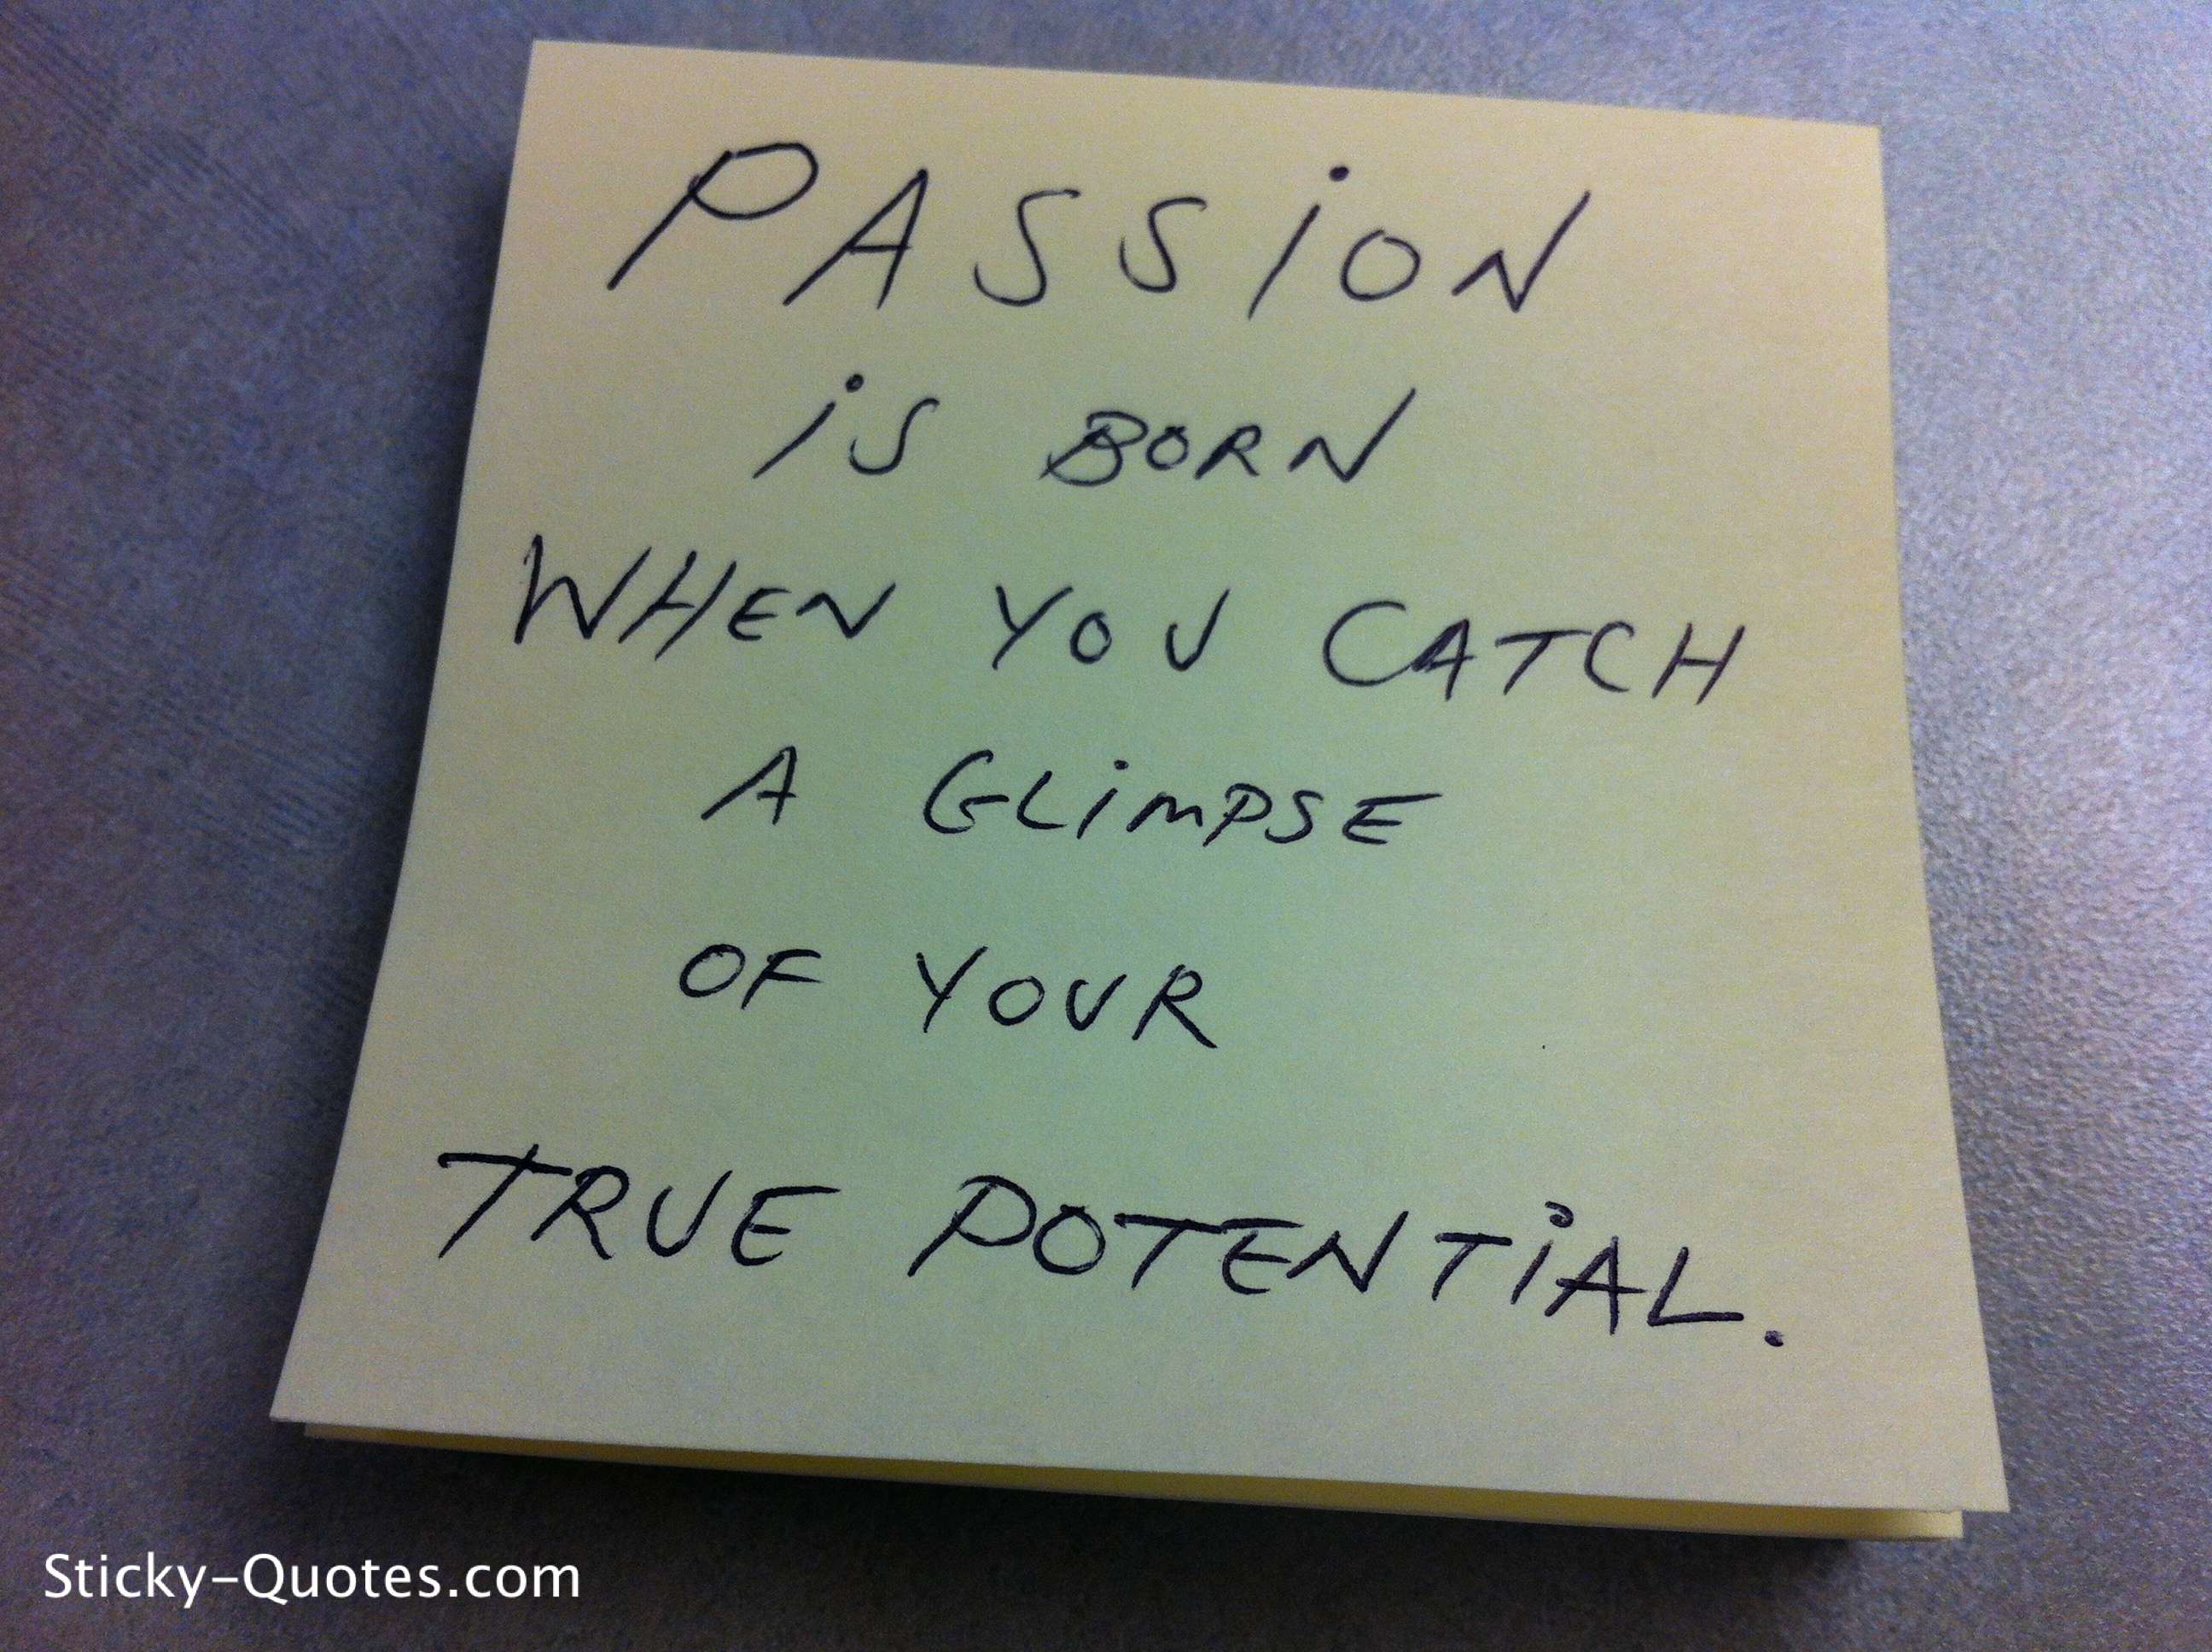 PASSION IS BORN WHEN YOU CATCH A GLIMPSE OF YOUR TRUE POTENTIAL